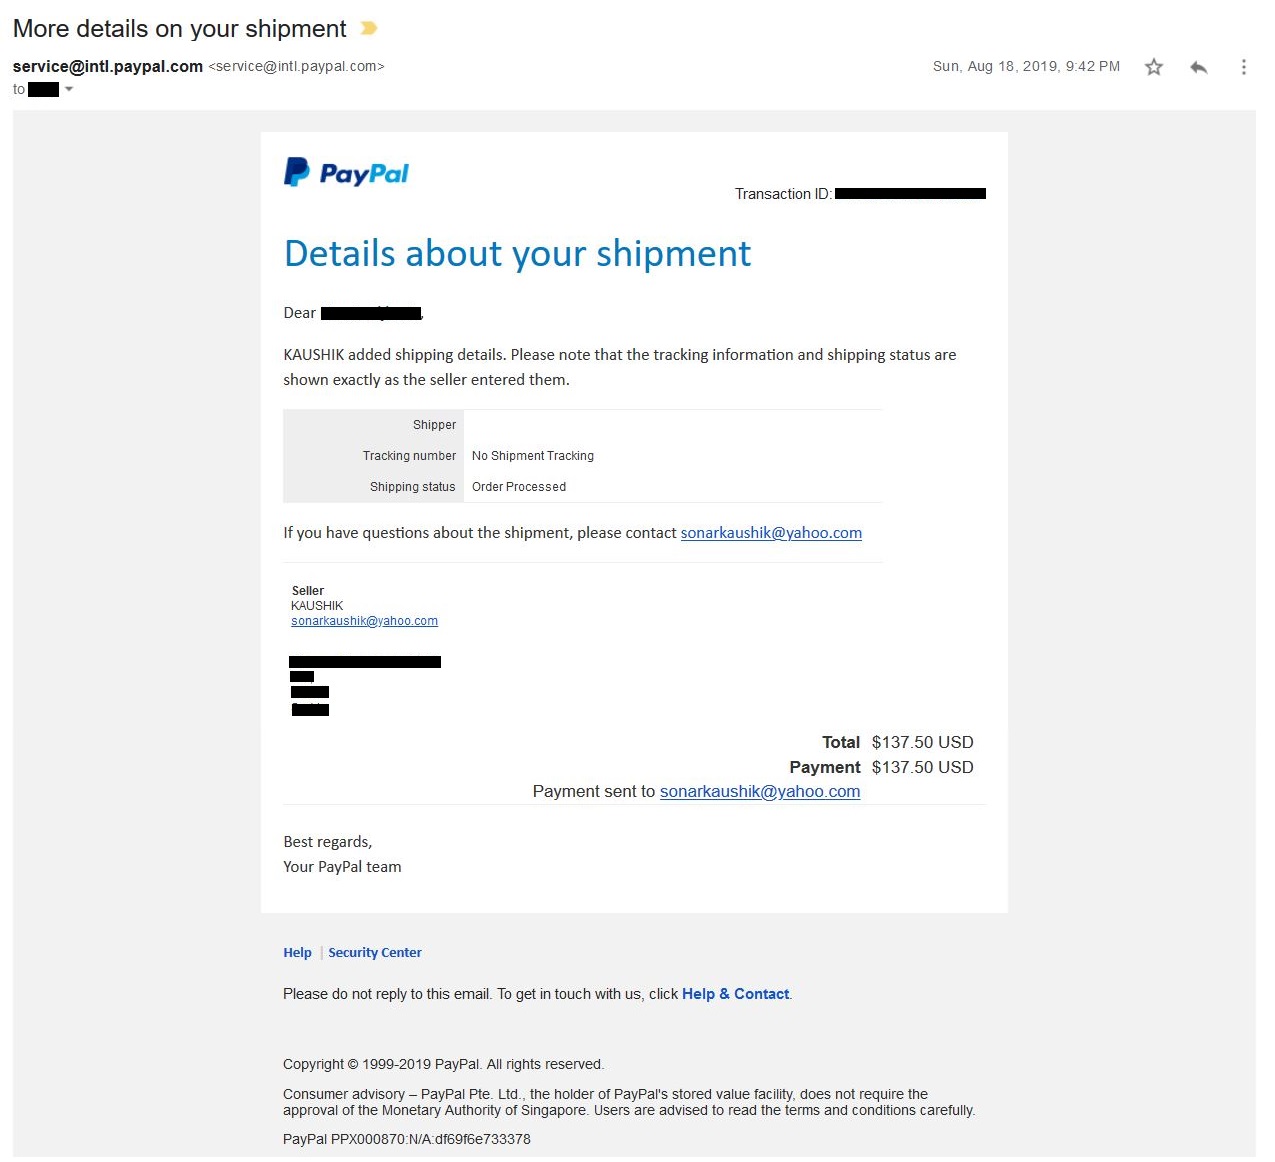 paypal-scam-more-details-on-your-shipment